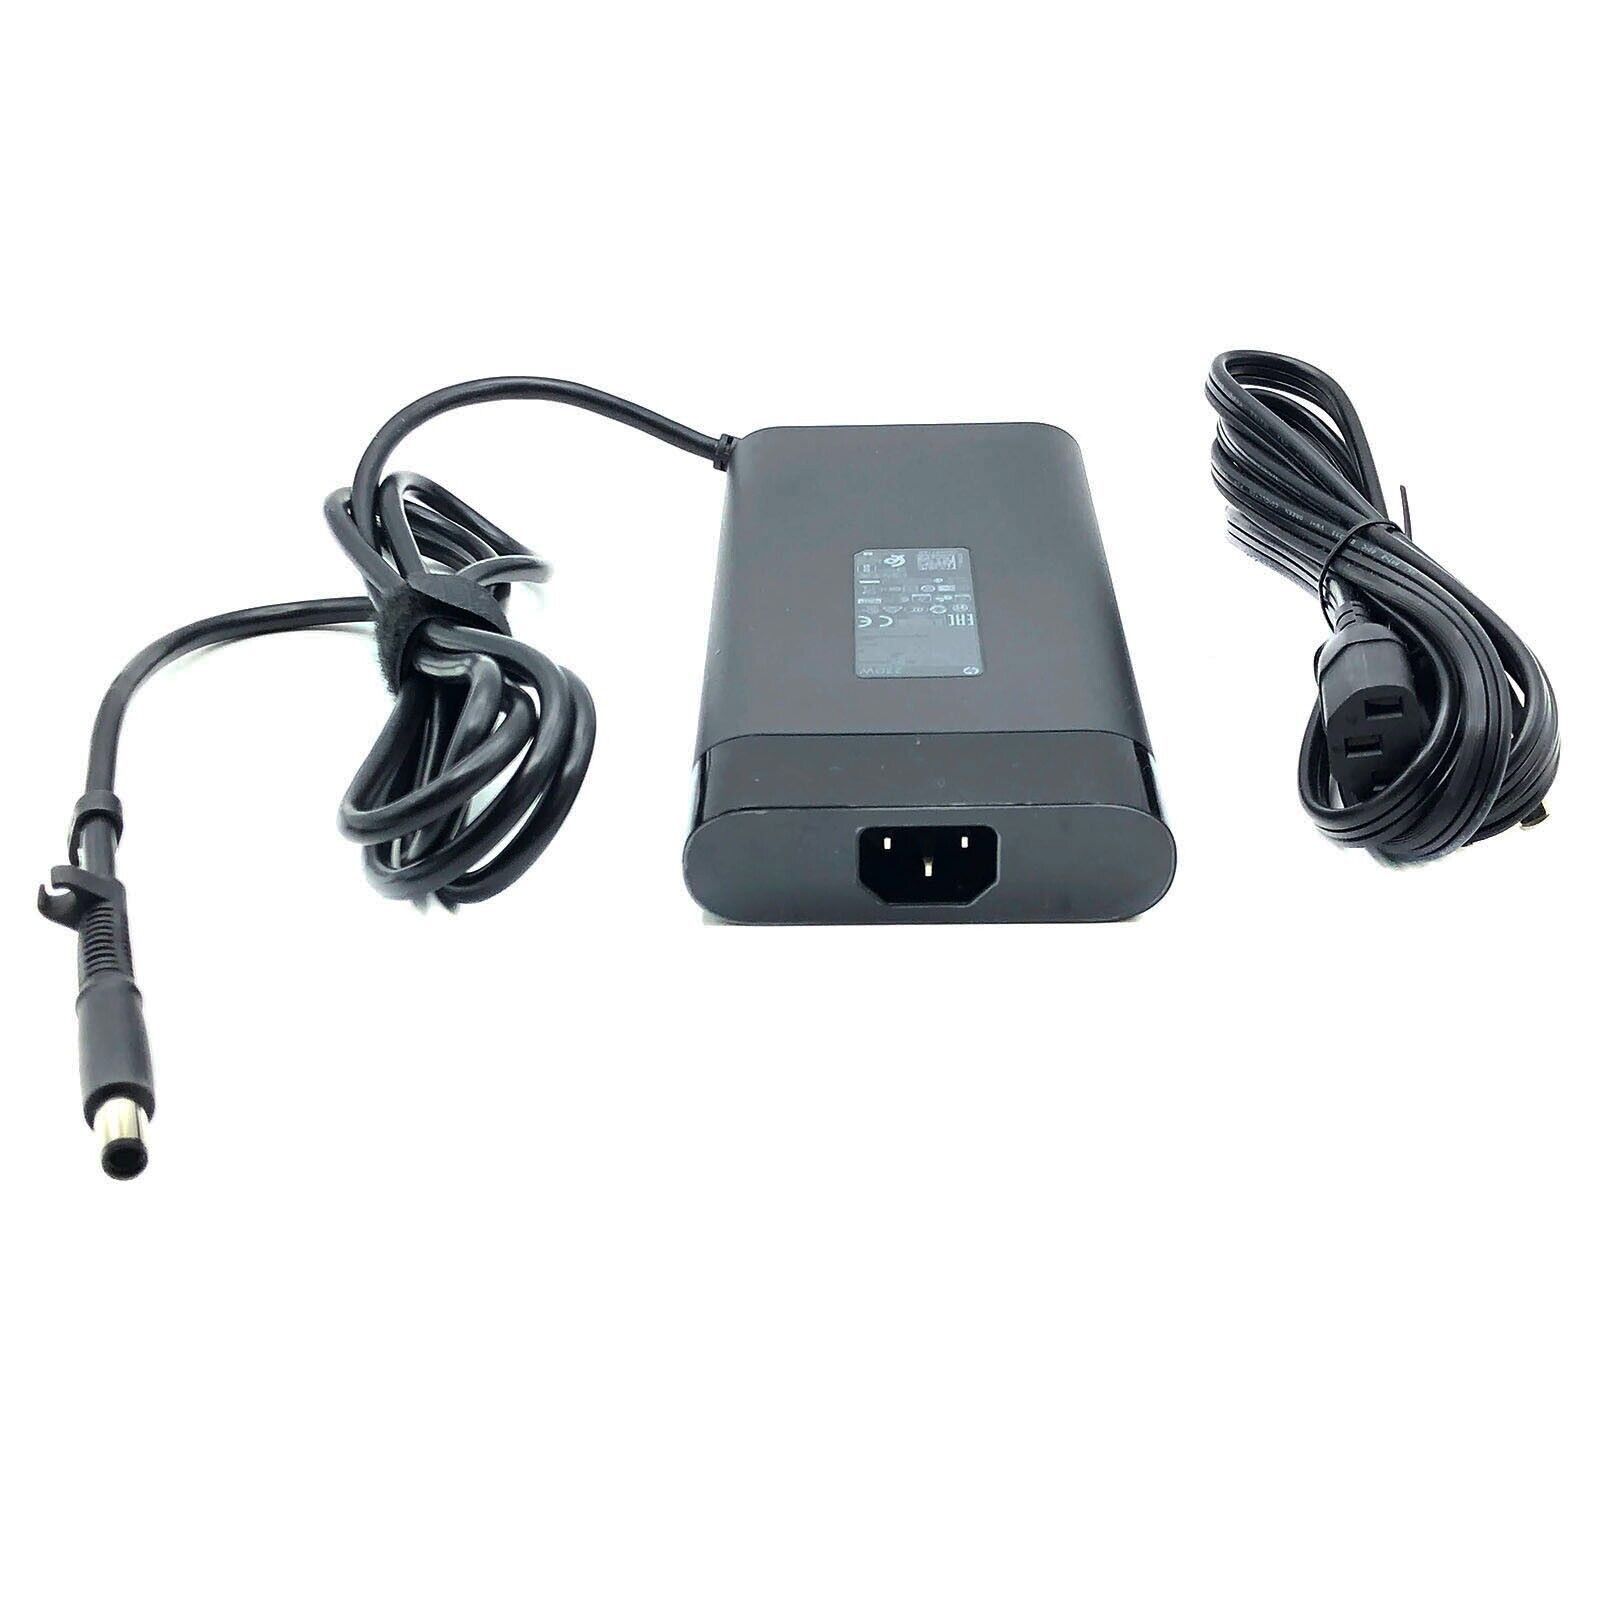 Authentic 230W HP AC DC Power Adapter for ZBook 15 G1 G2 Mobile Workstation